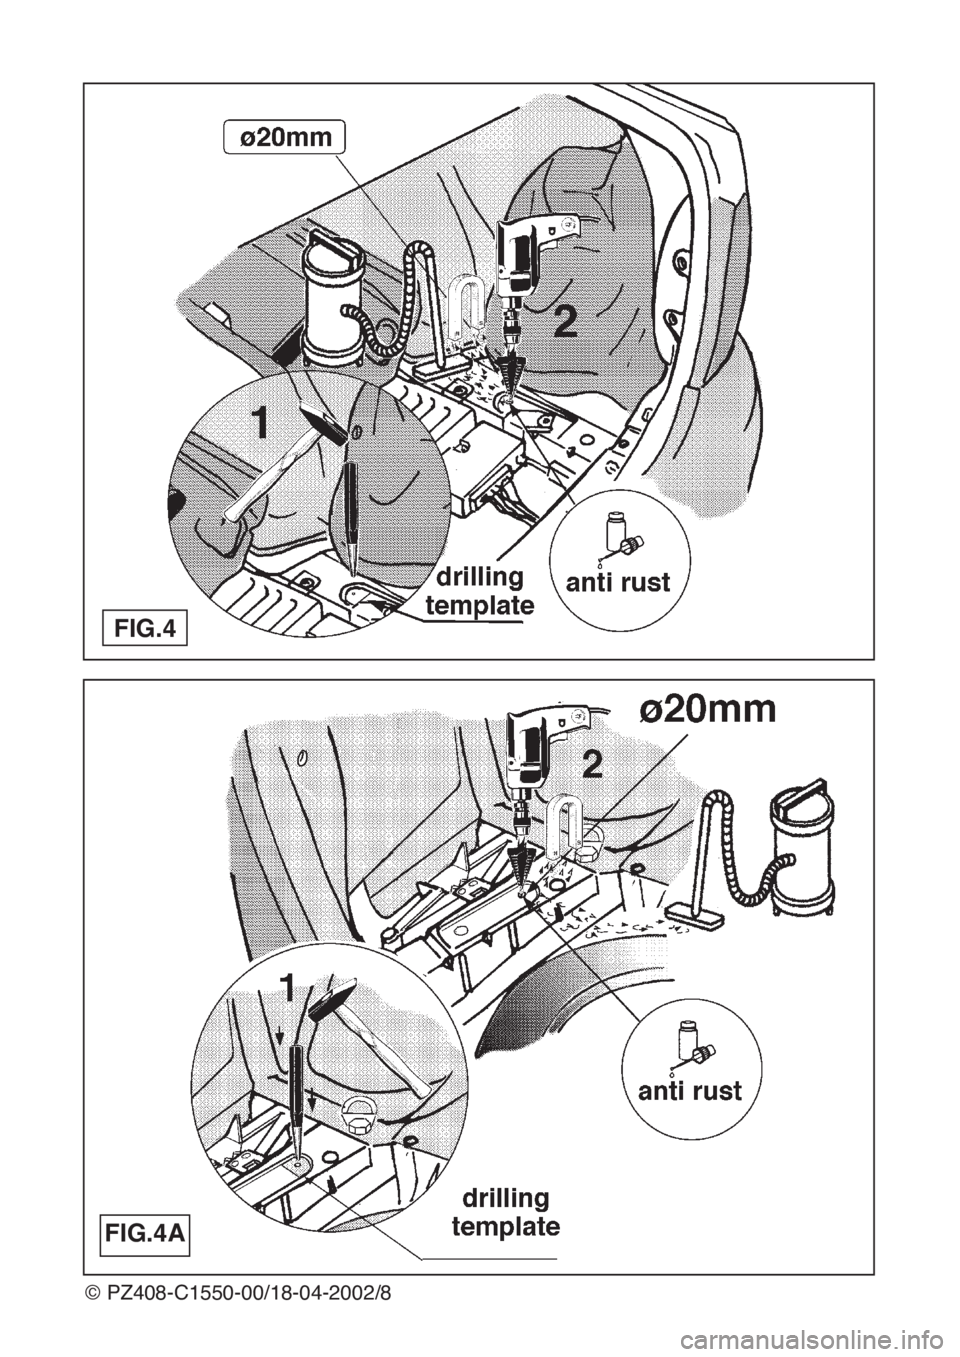 Lexus IS200 1999  Towing hitch © PZ408-C1550-00/18-04-2002/8
FIG.4
FIG.4A 